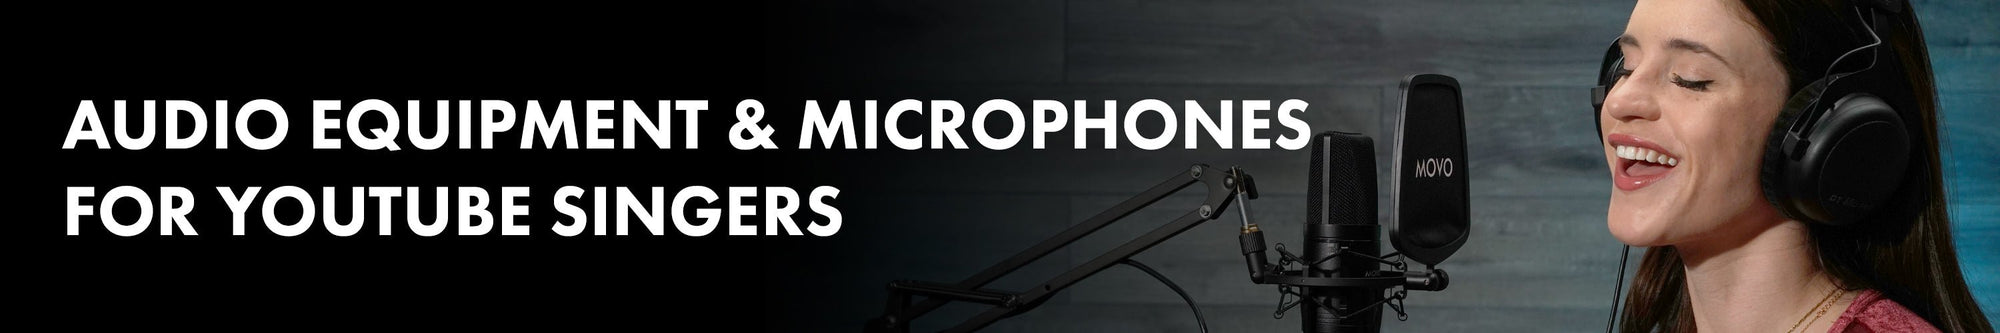 Microphones for YouTube Singers